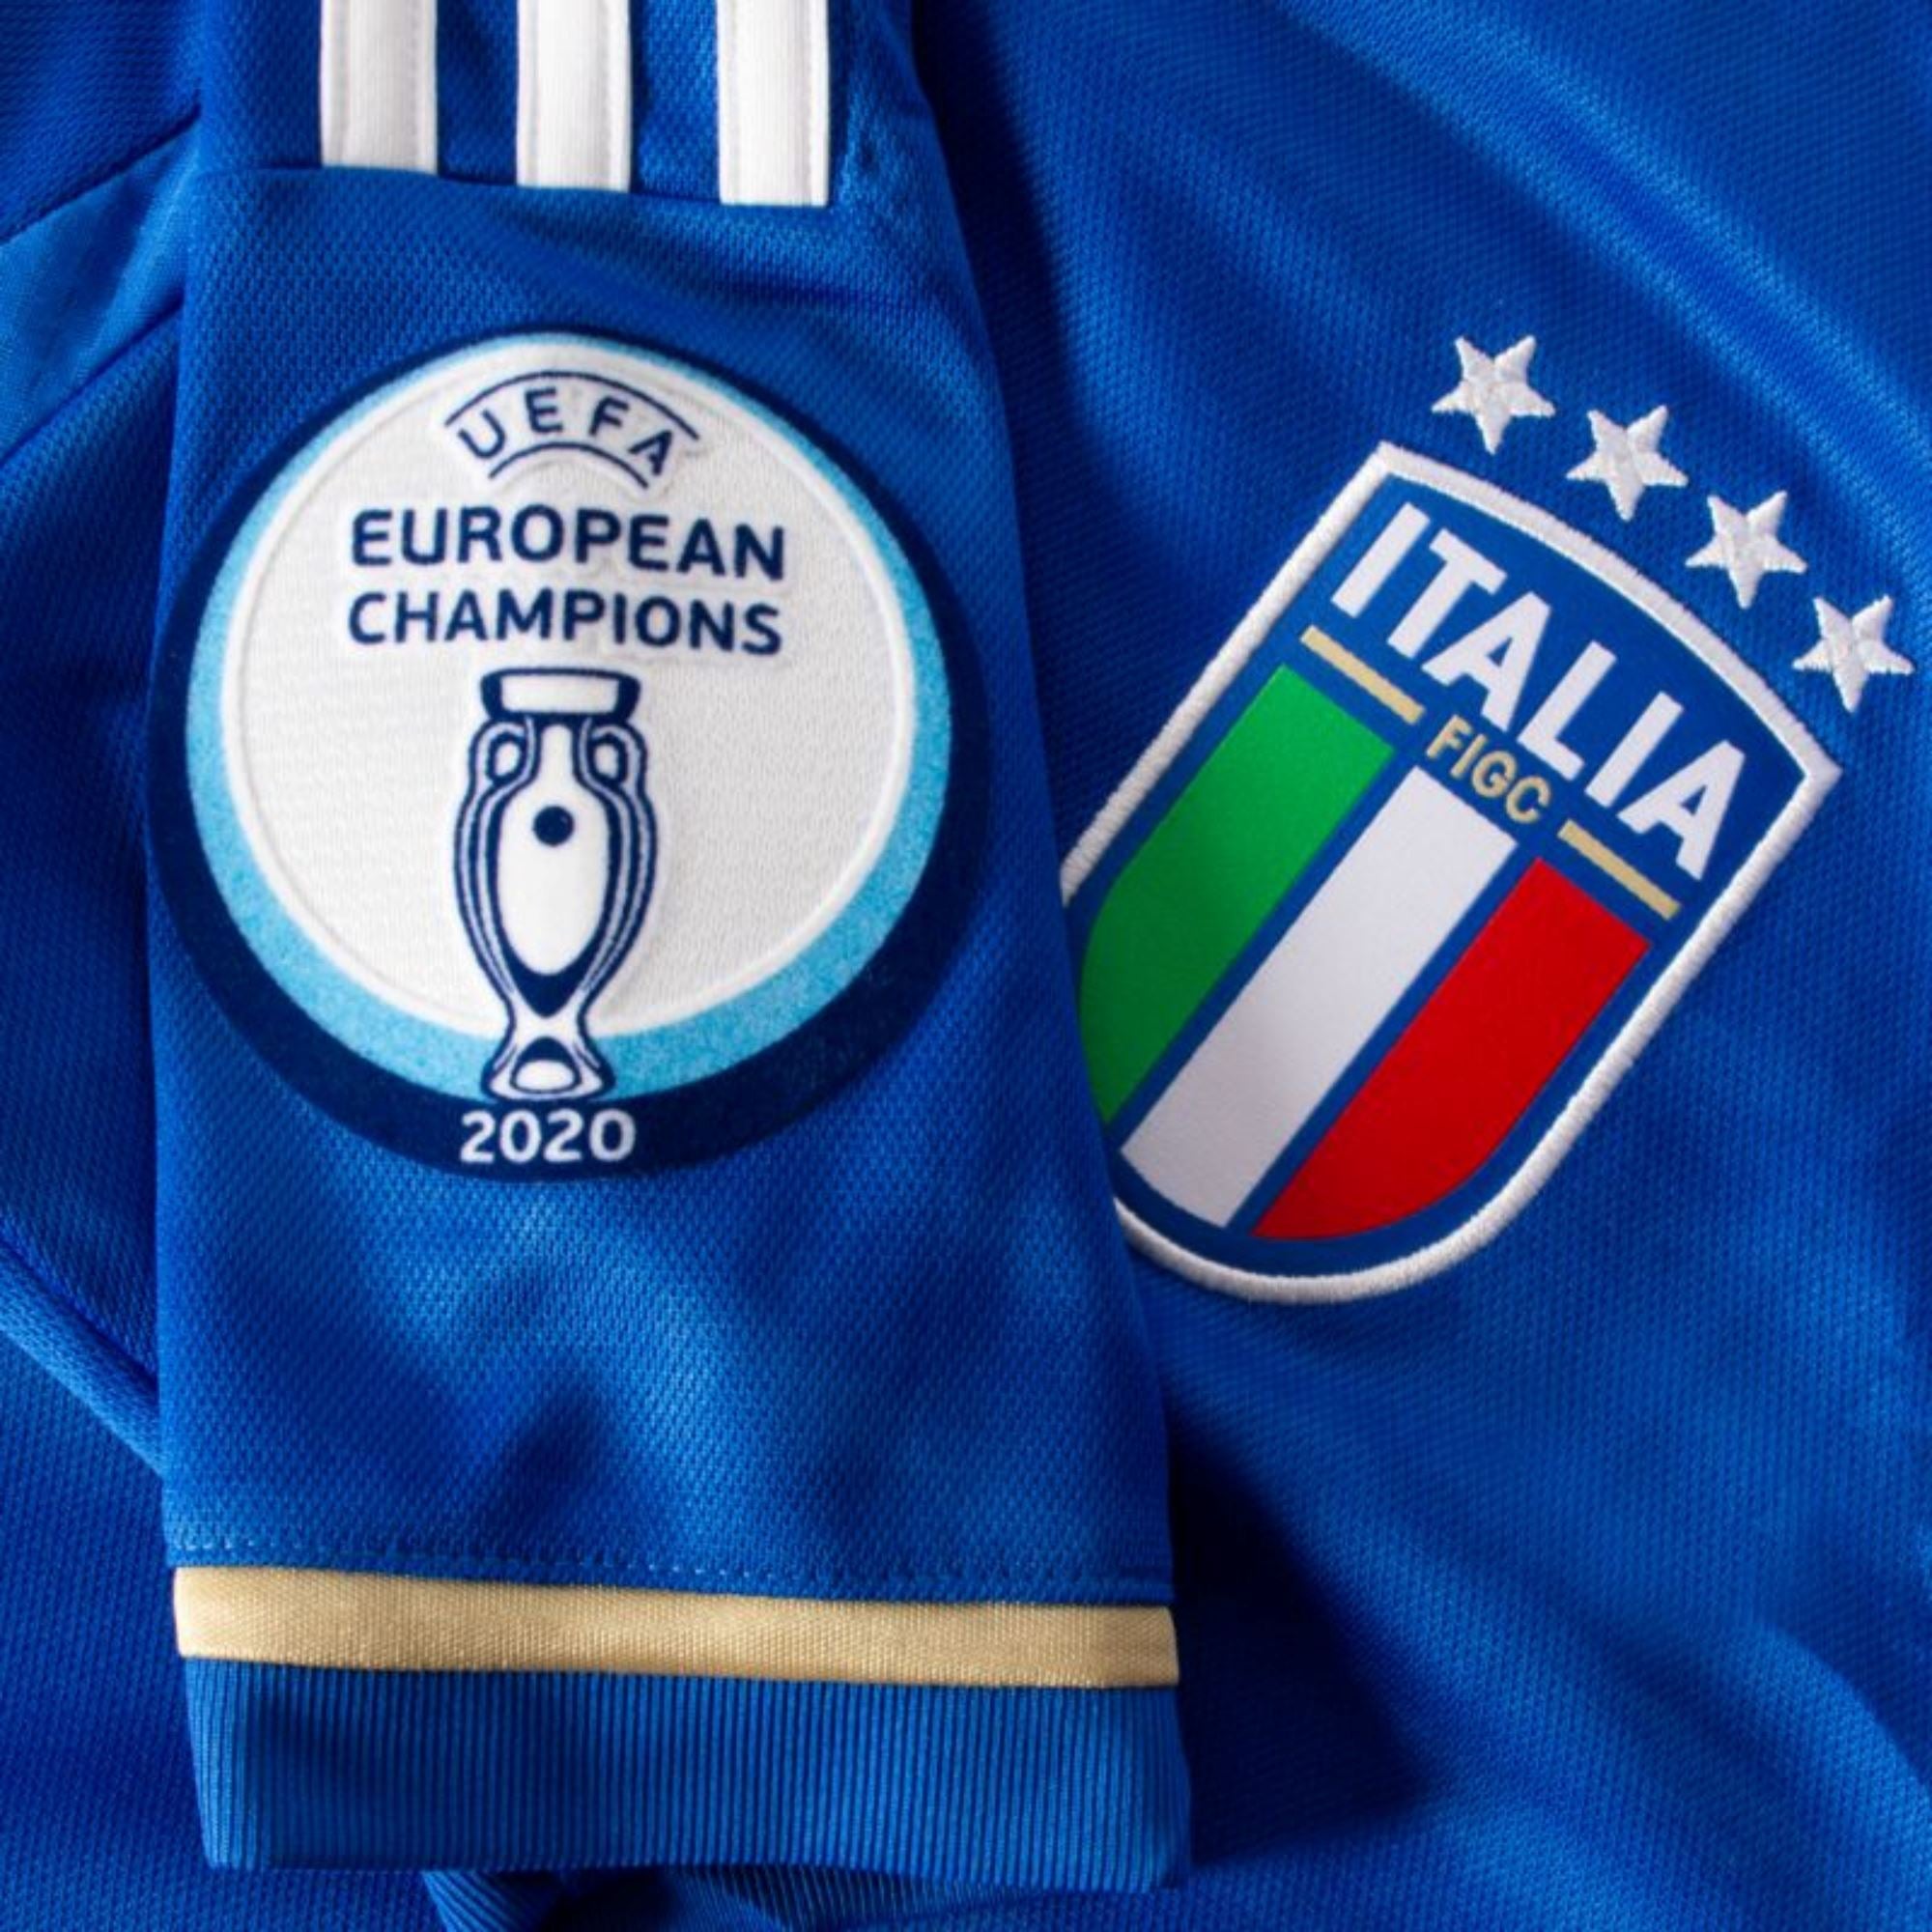 Italy Home Jersey 23/24 Euro 2024 Qualifying Patches - ADIDAS